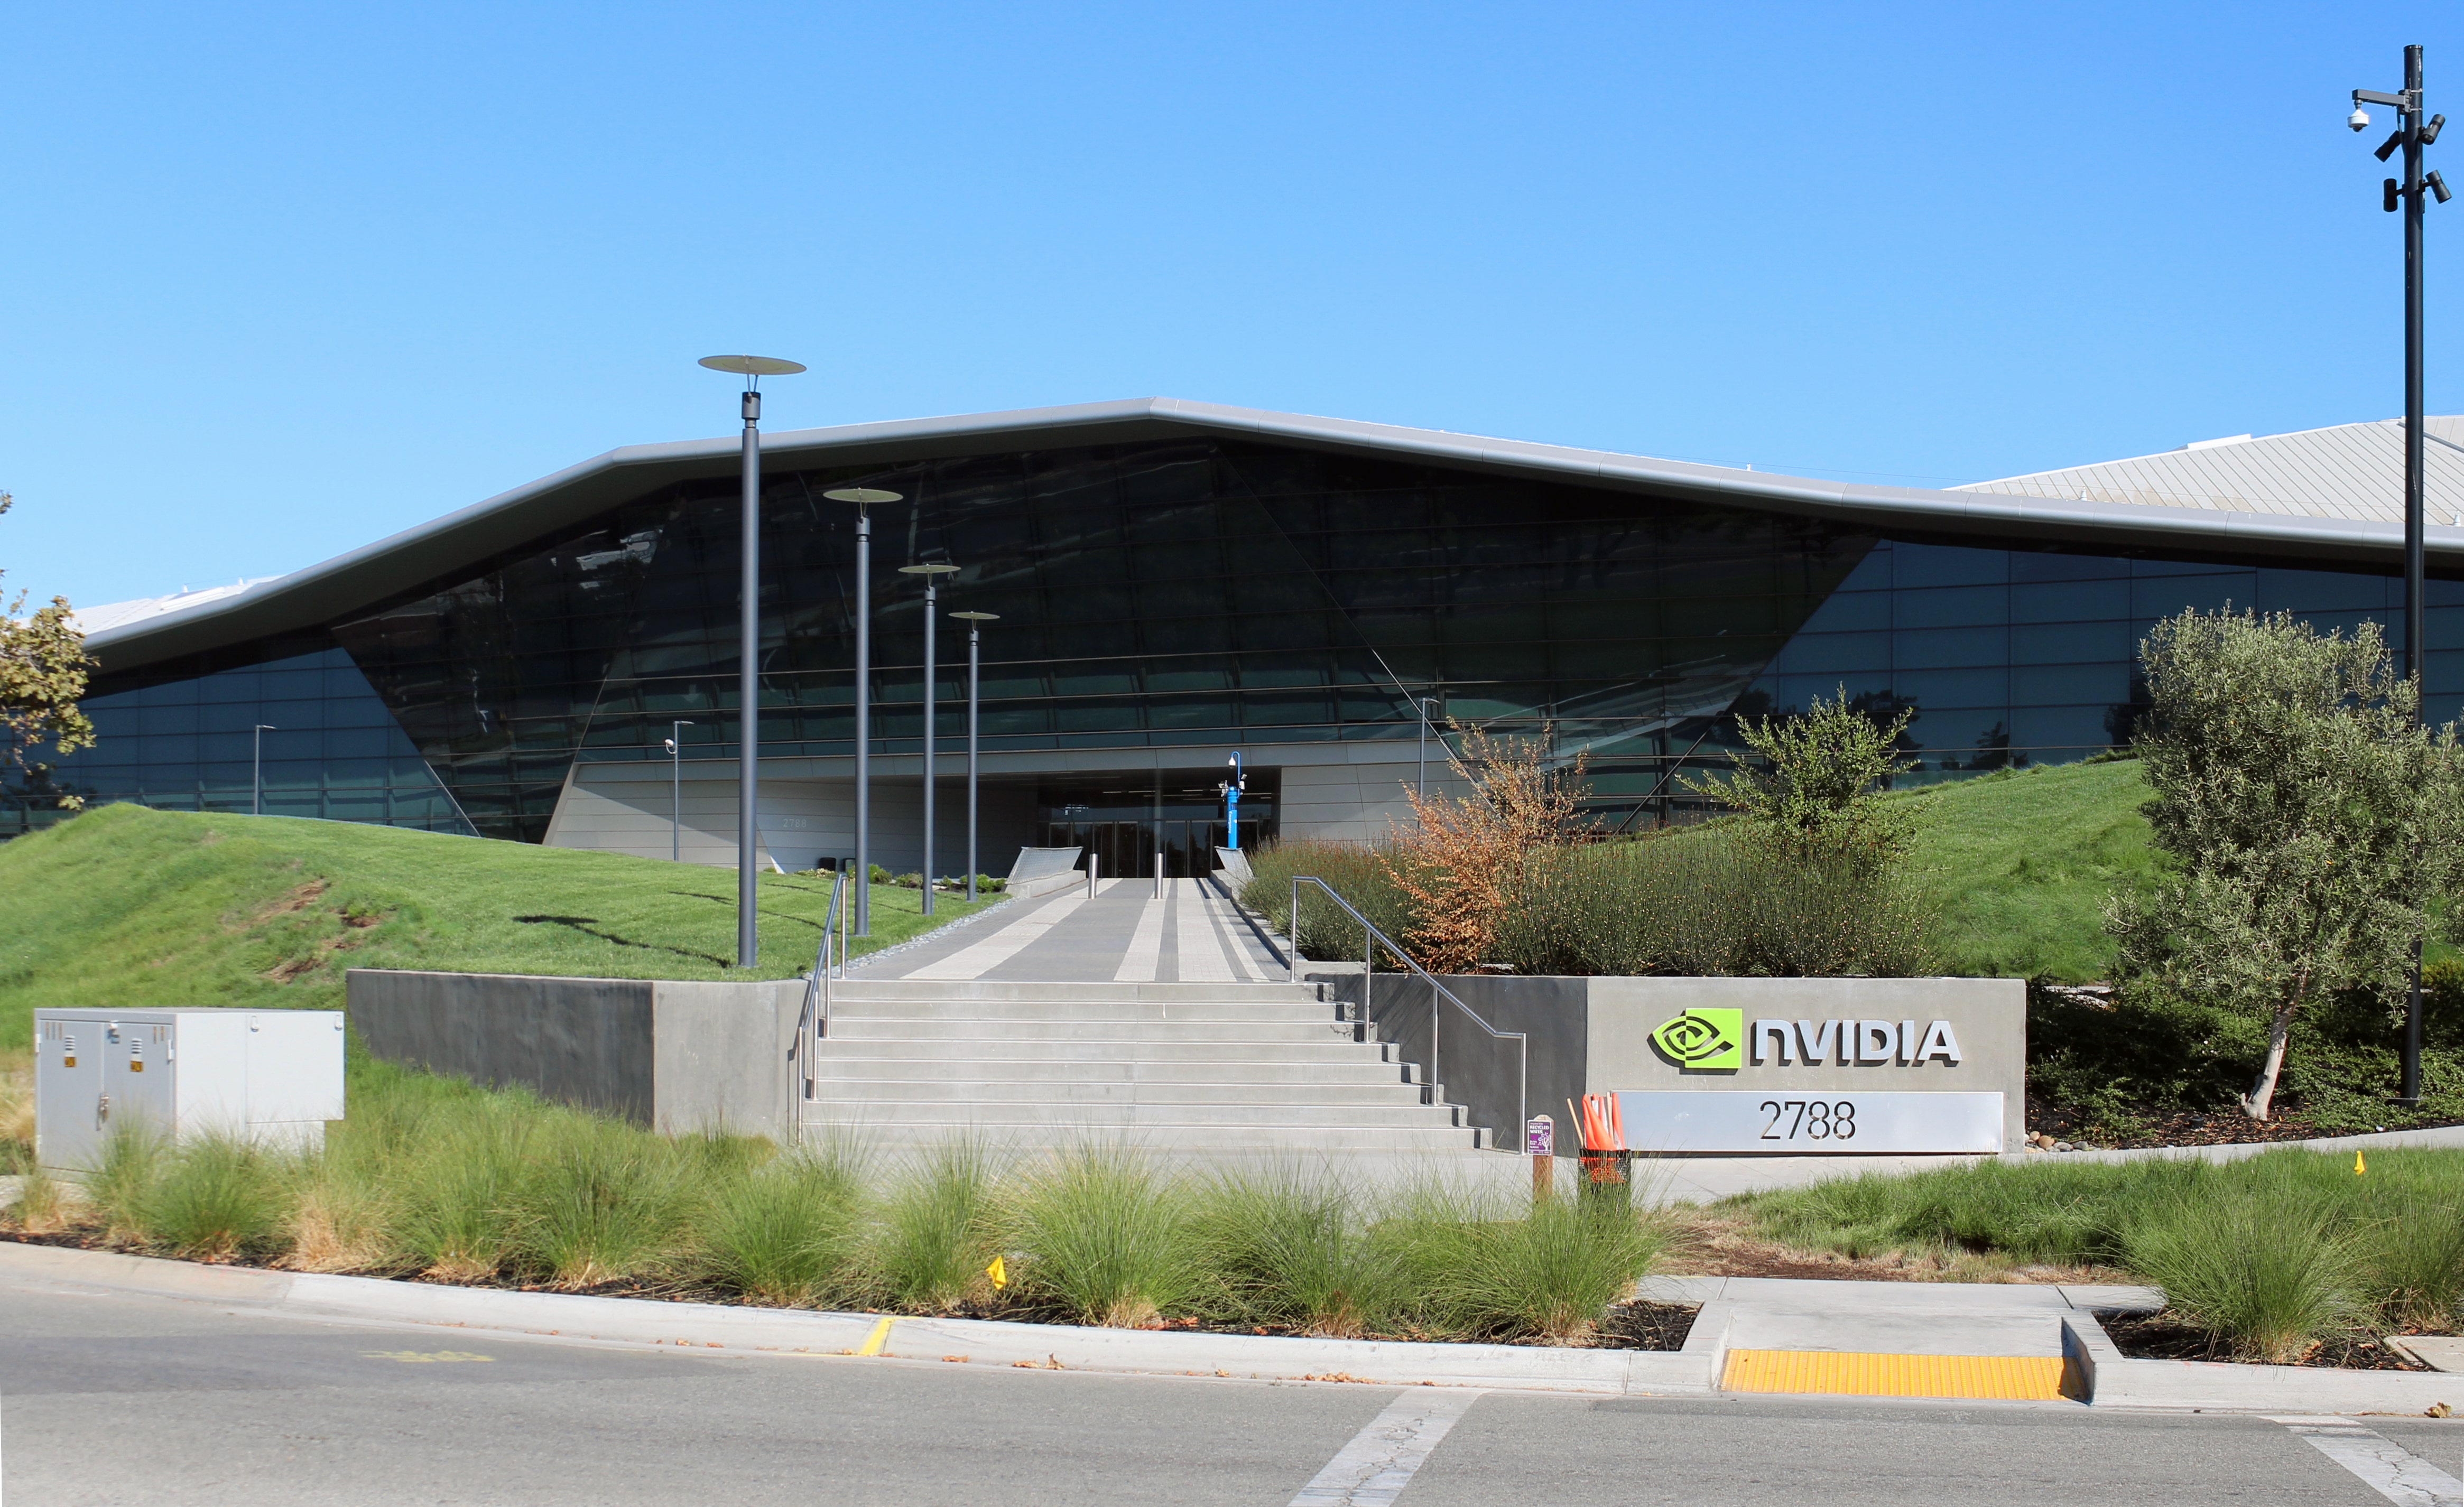 Nvidia Stock Spikes Higher In This Bearish Trend: What To Watch For Next